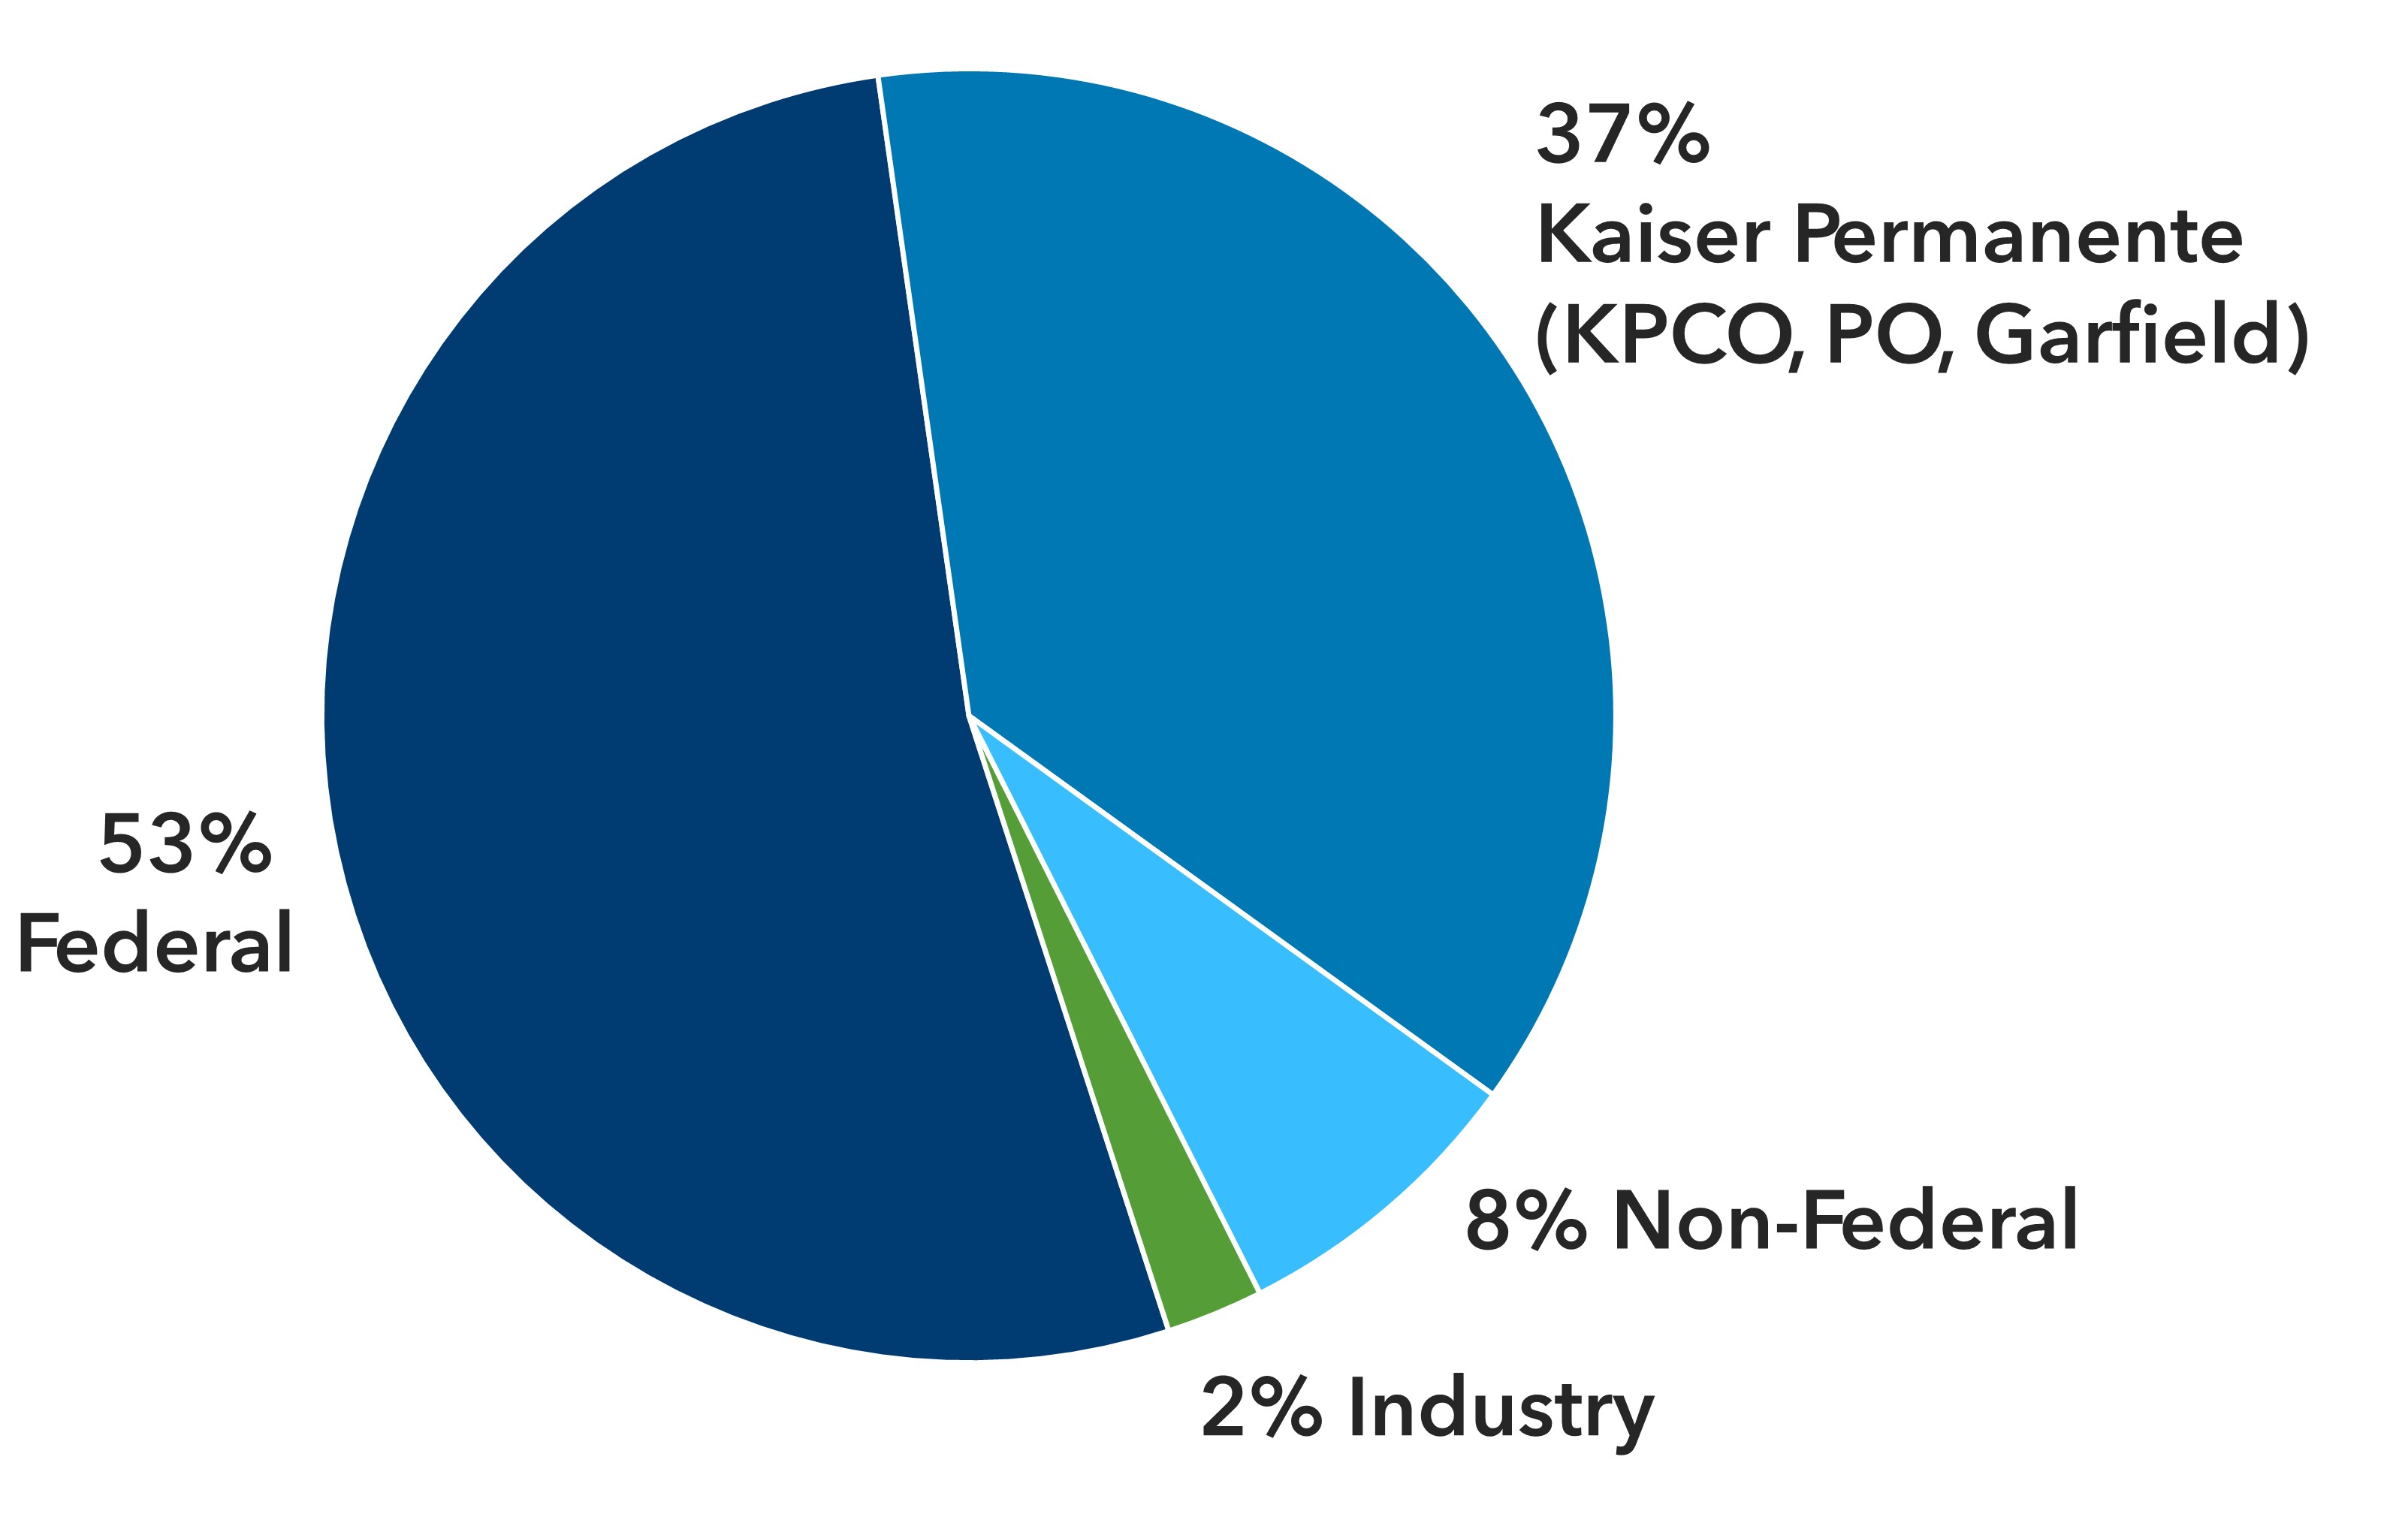  2022 IHR Federal Funding Pie Chart. 53% Federal, 37% Kaiser Permanente, 8% Non-Federal, 2% Industry